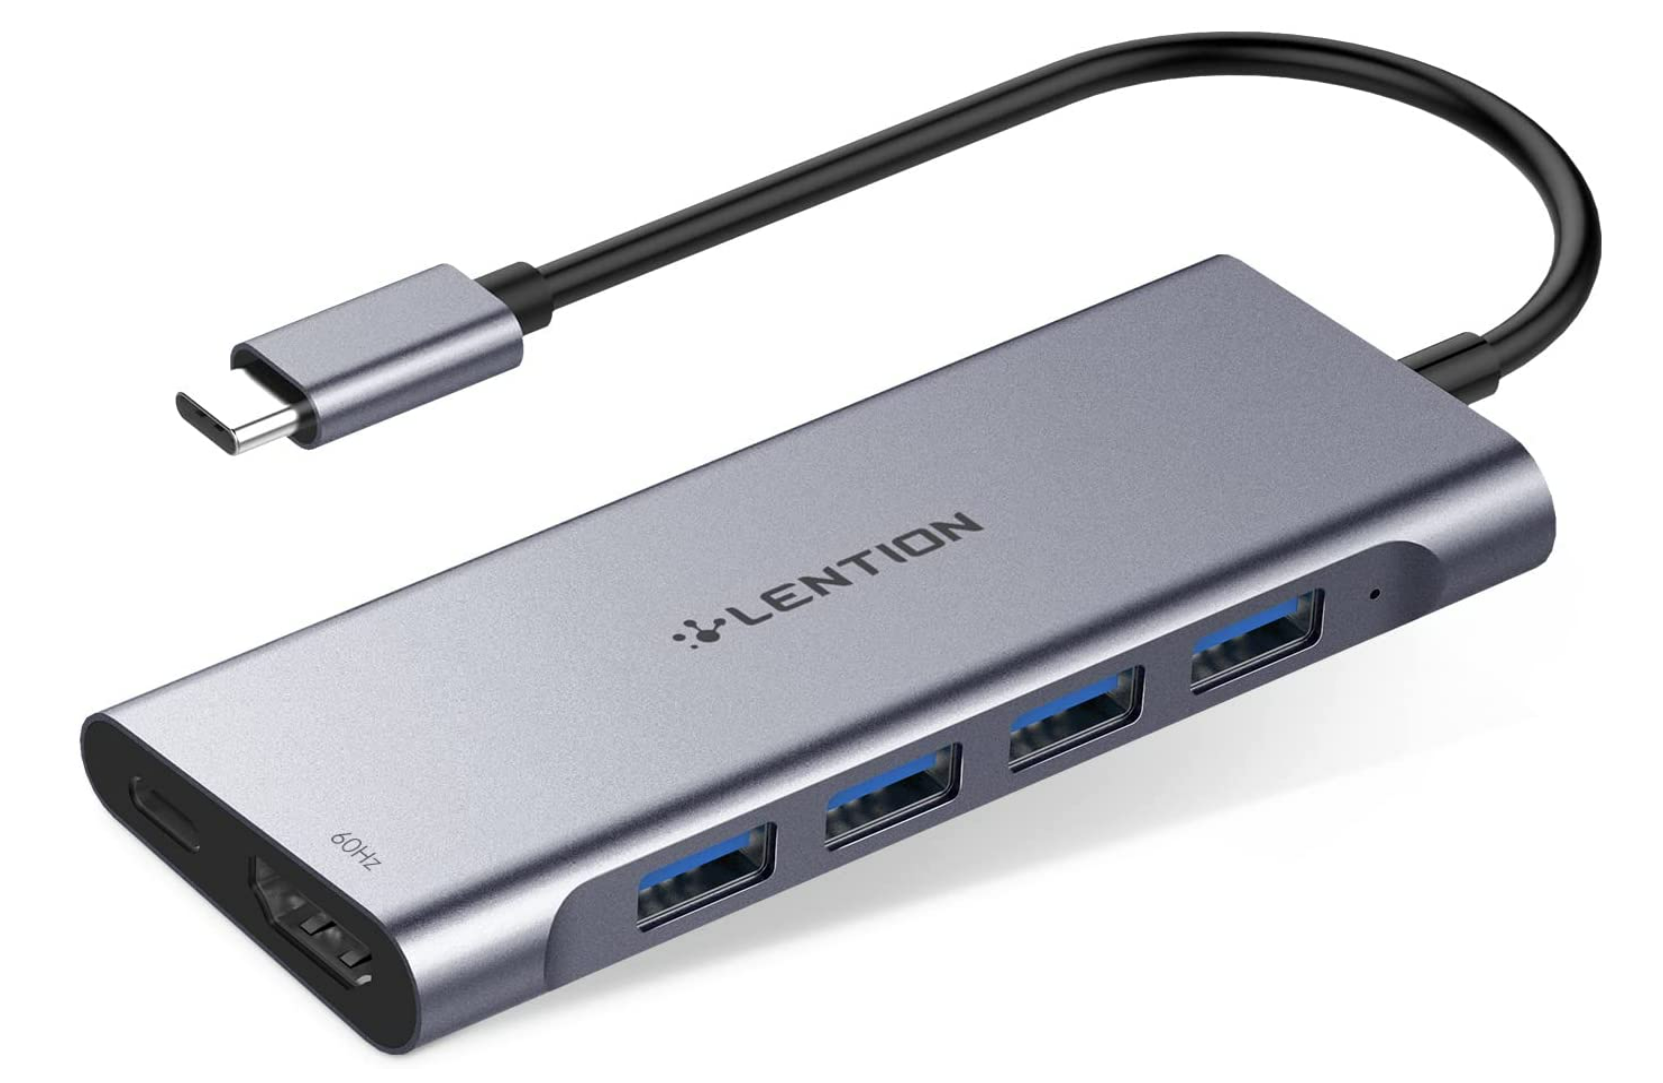 Transfer over, Thunderbolt: How DisplayLink USB-C docks can supercharge your laptop computer